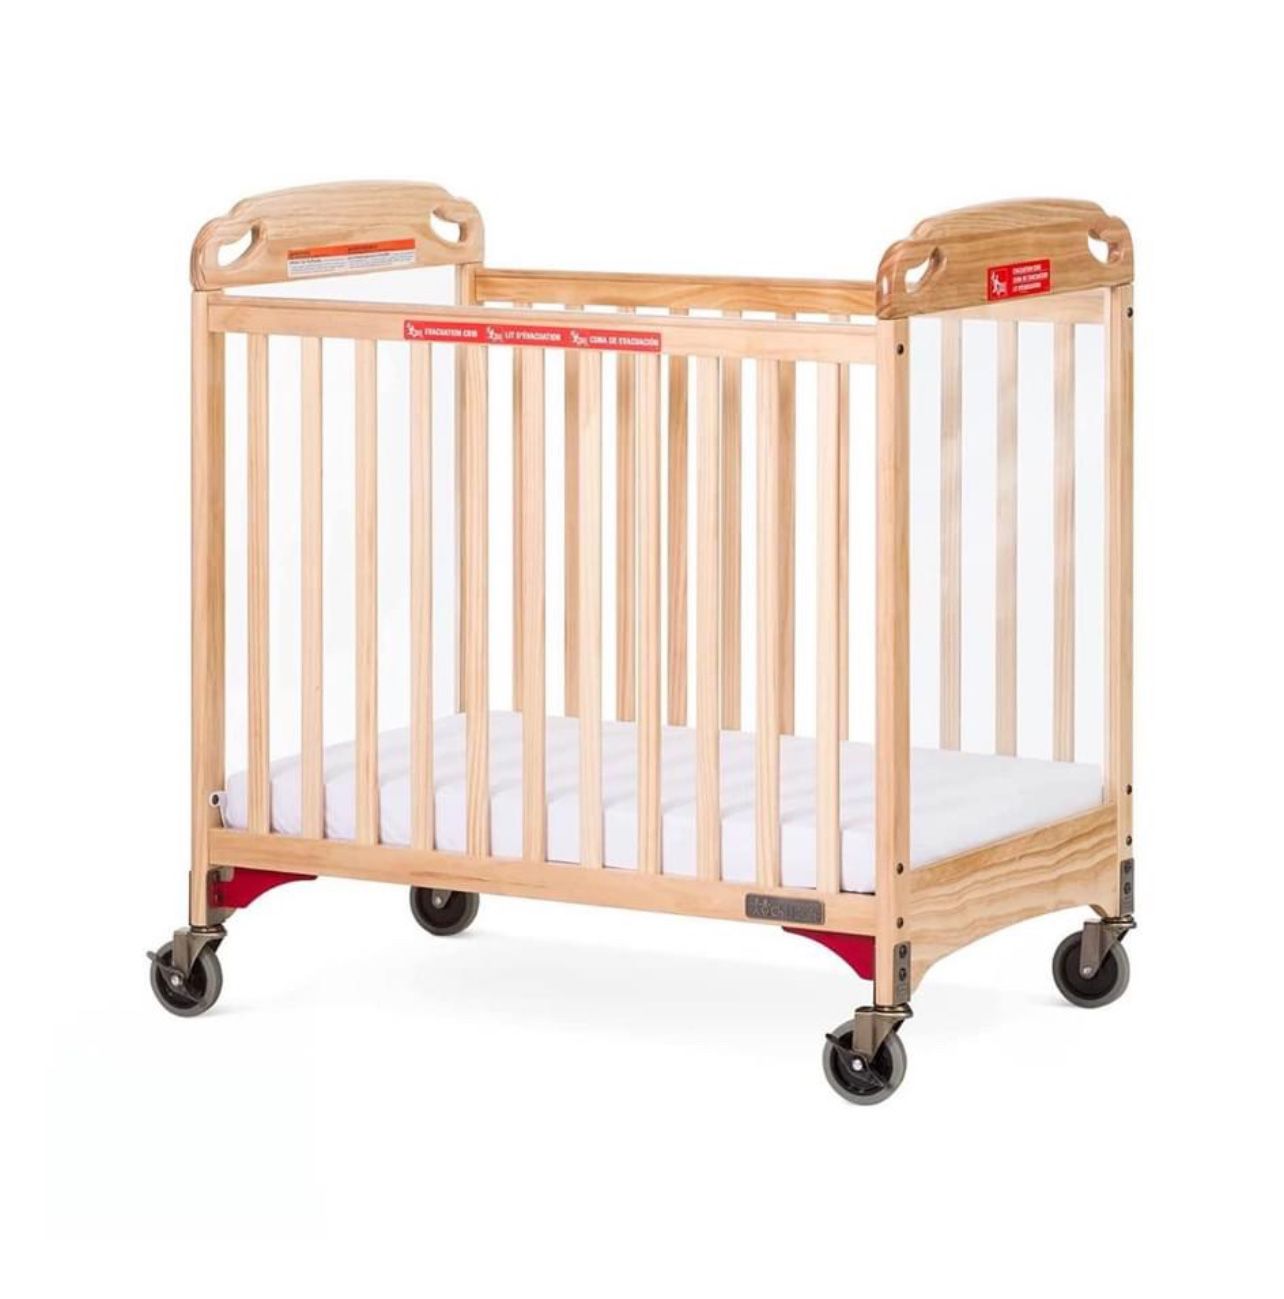 Safe Haven Daycare Evacuation Wooden Compact Portable Crib with 4" Casters (Natural)